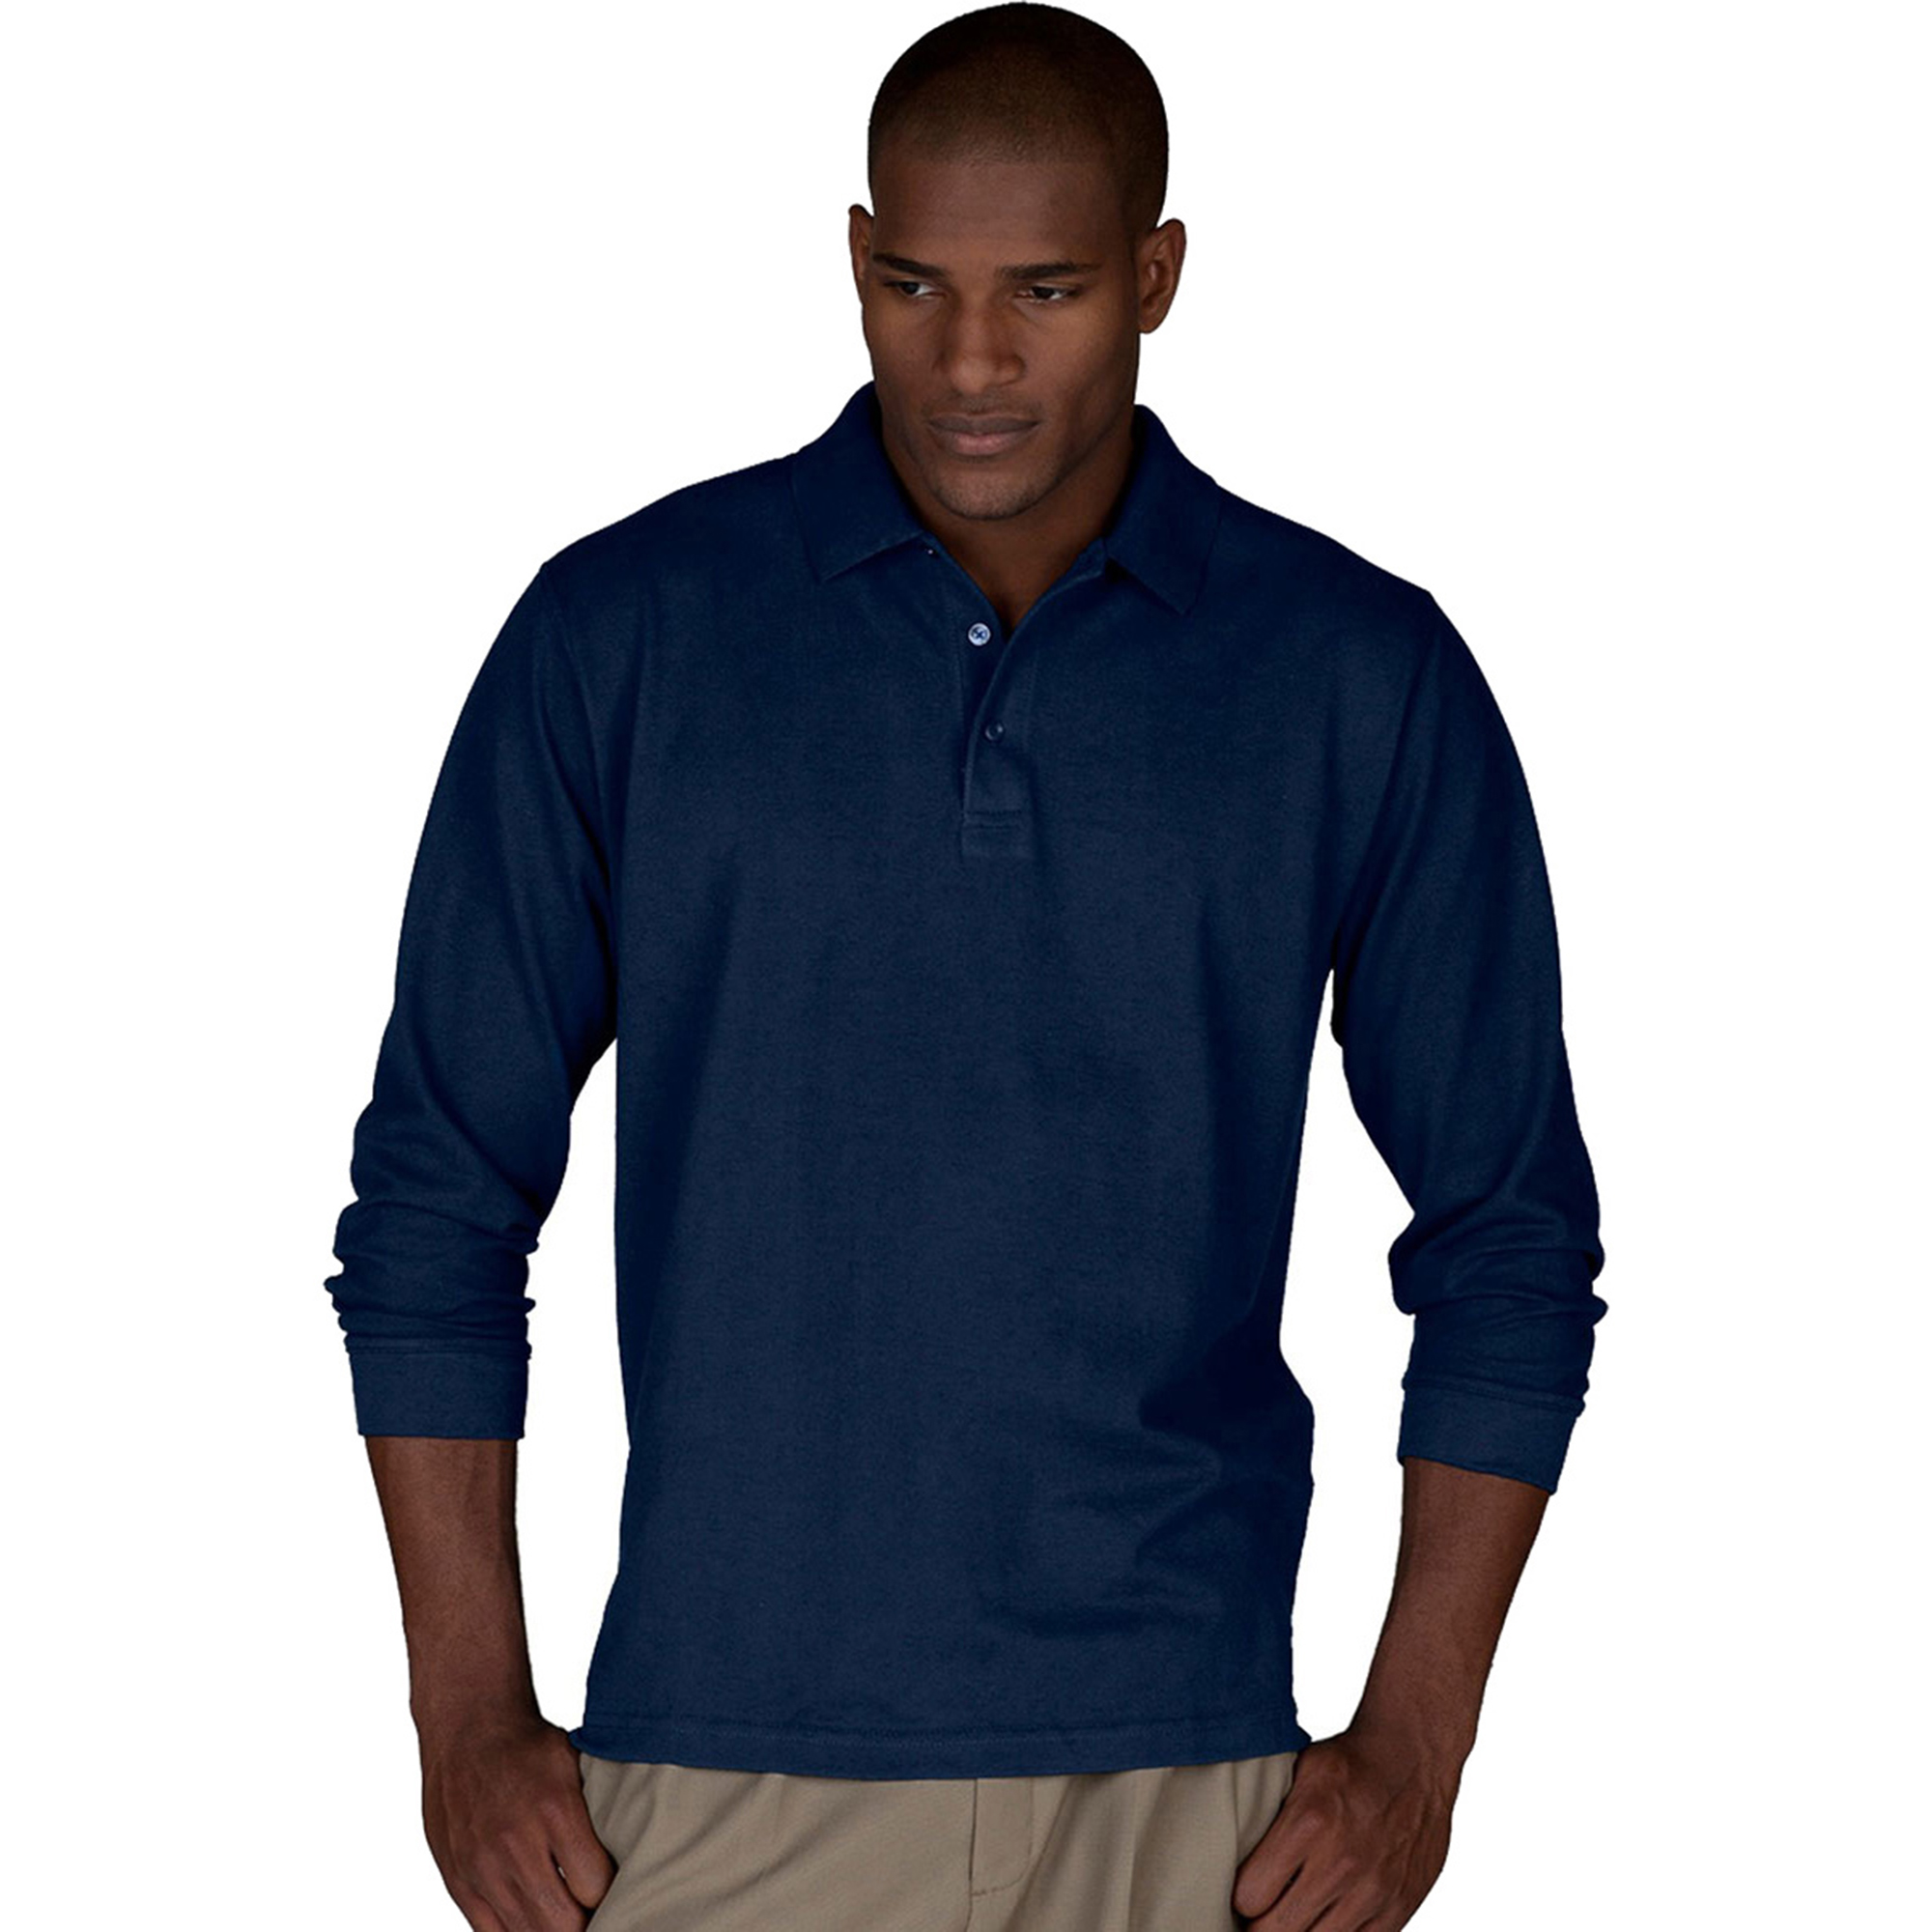 1515 Men's Sleeve Wrinkle Resistant Cotton Poly